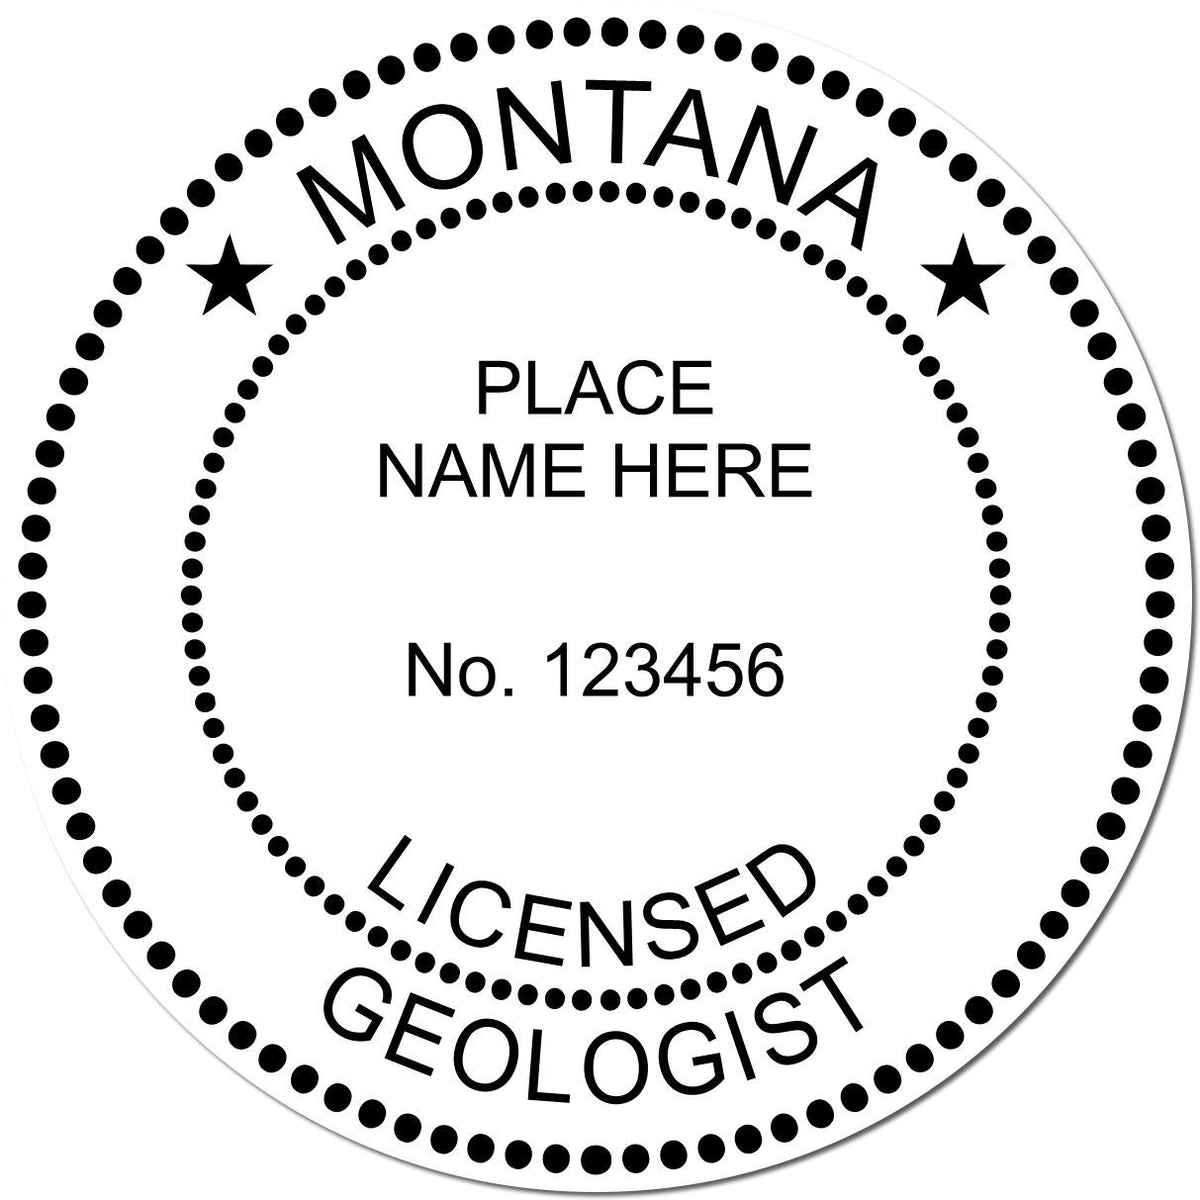 This paper is stamped with a sample imprint of the Slim Pre-Inked Montana Professional Geologist Seal Stamp, signifying its quality and reliability.